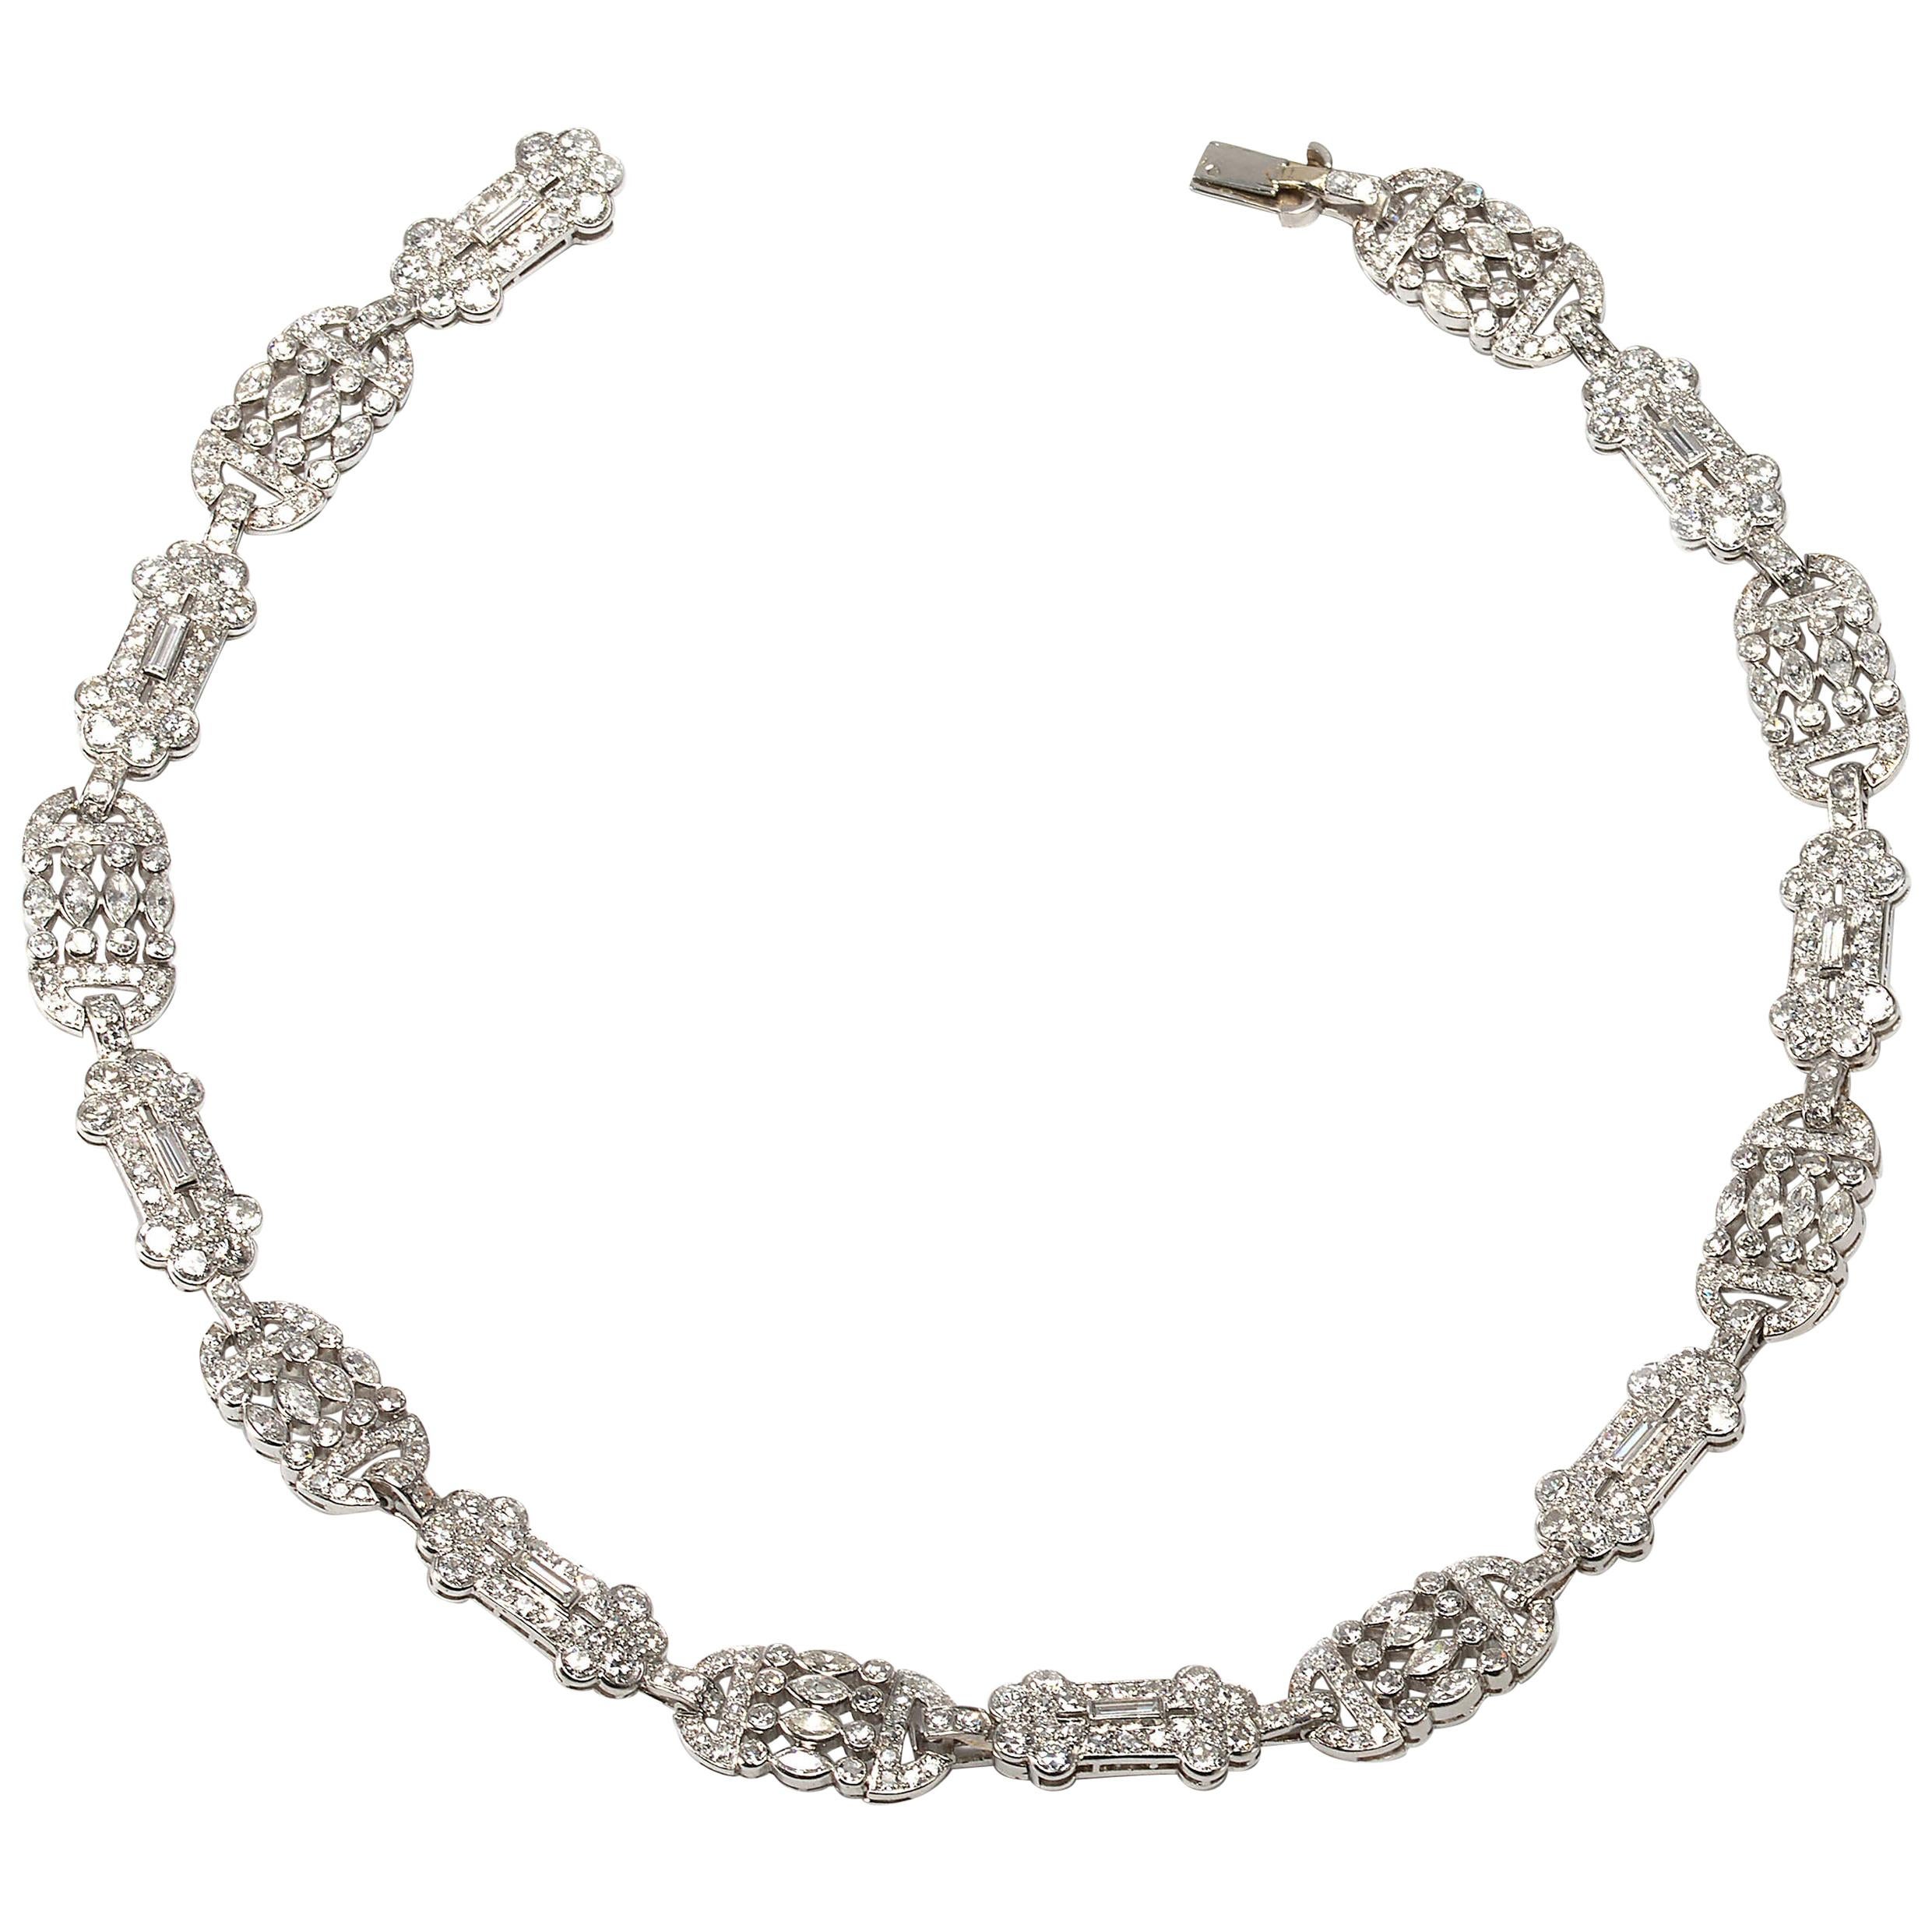 Early 20th Century French Diamond Necklace or Bracelets For Sale